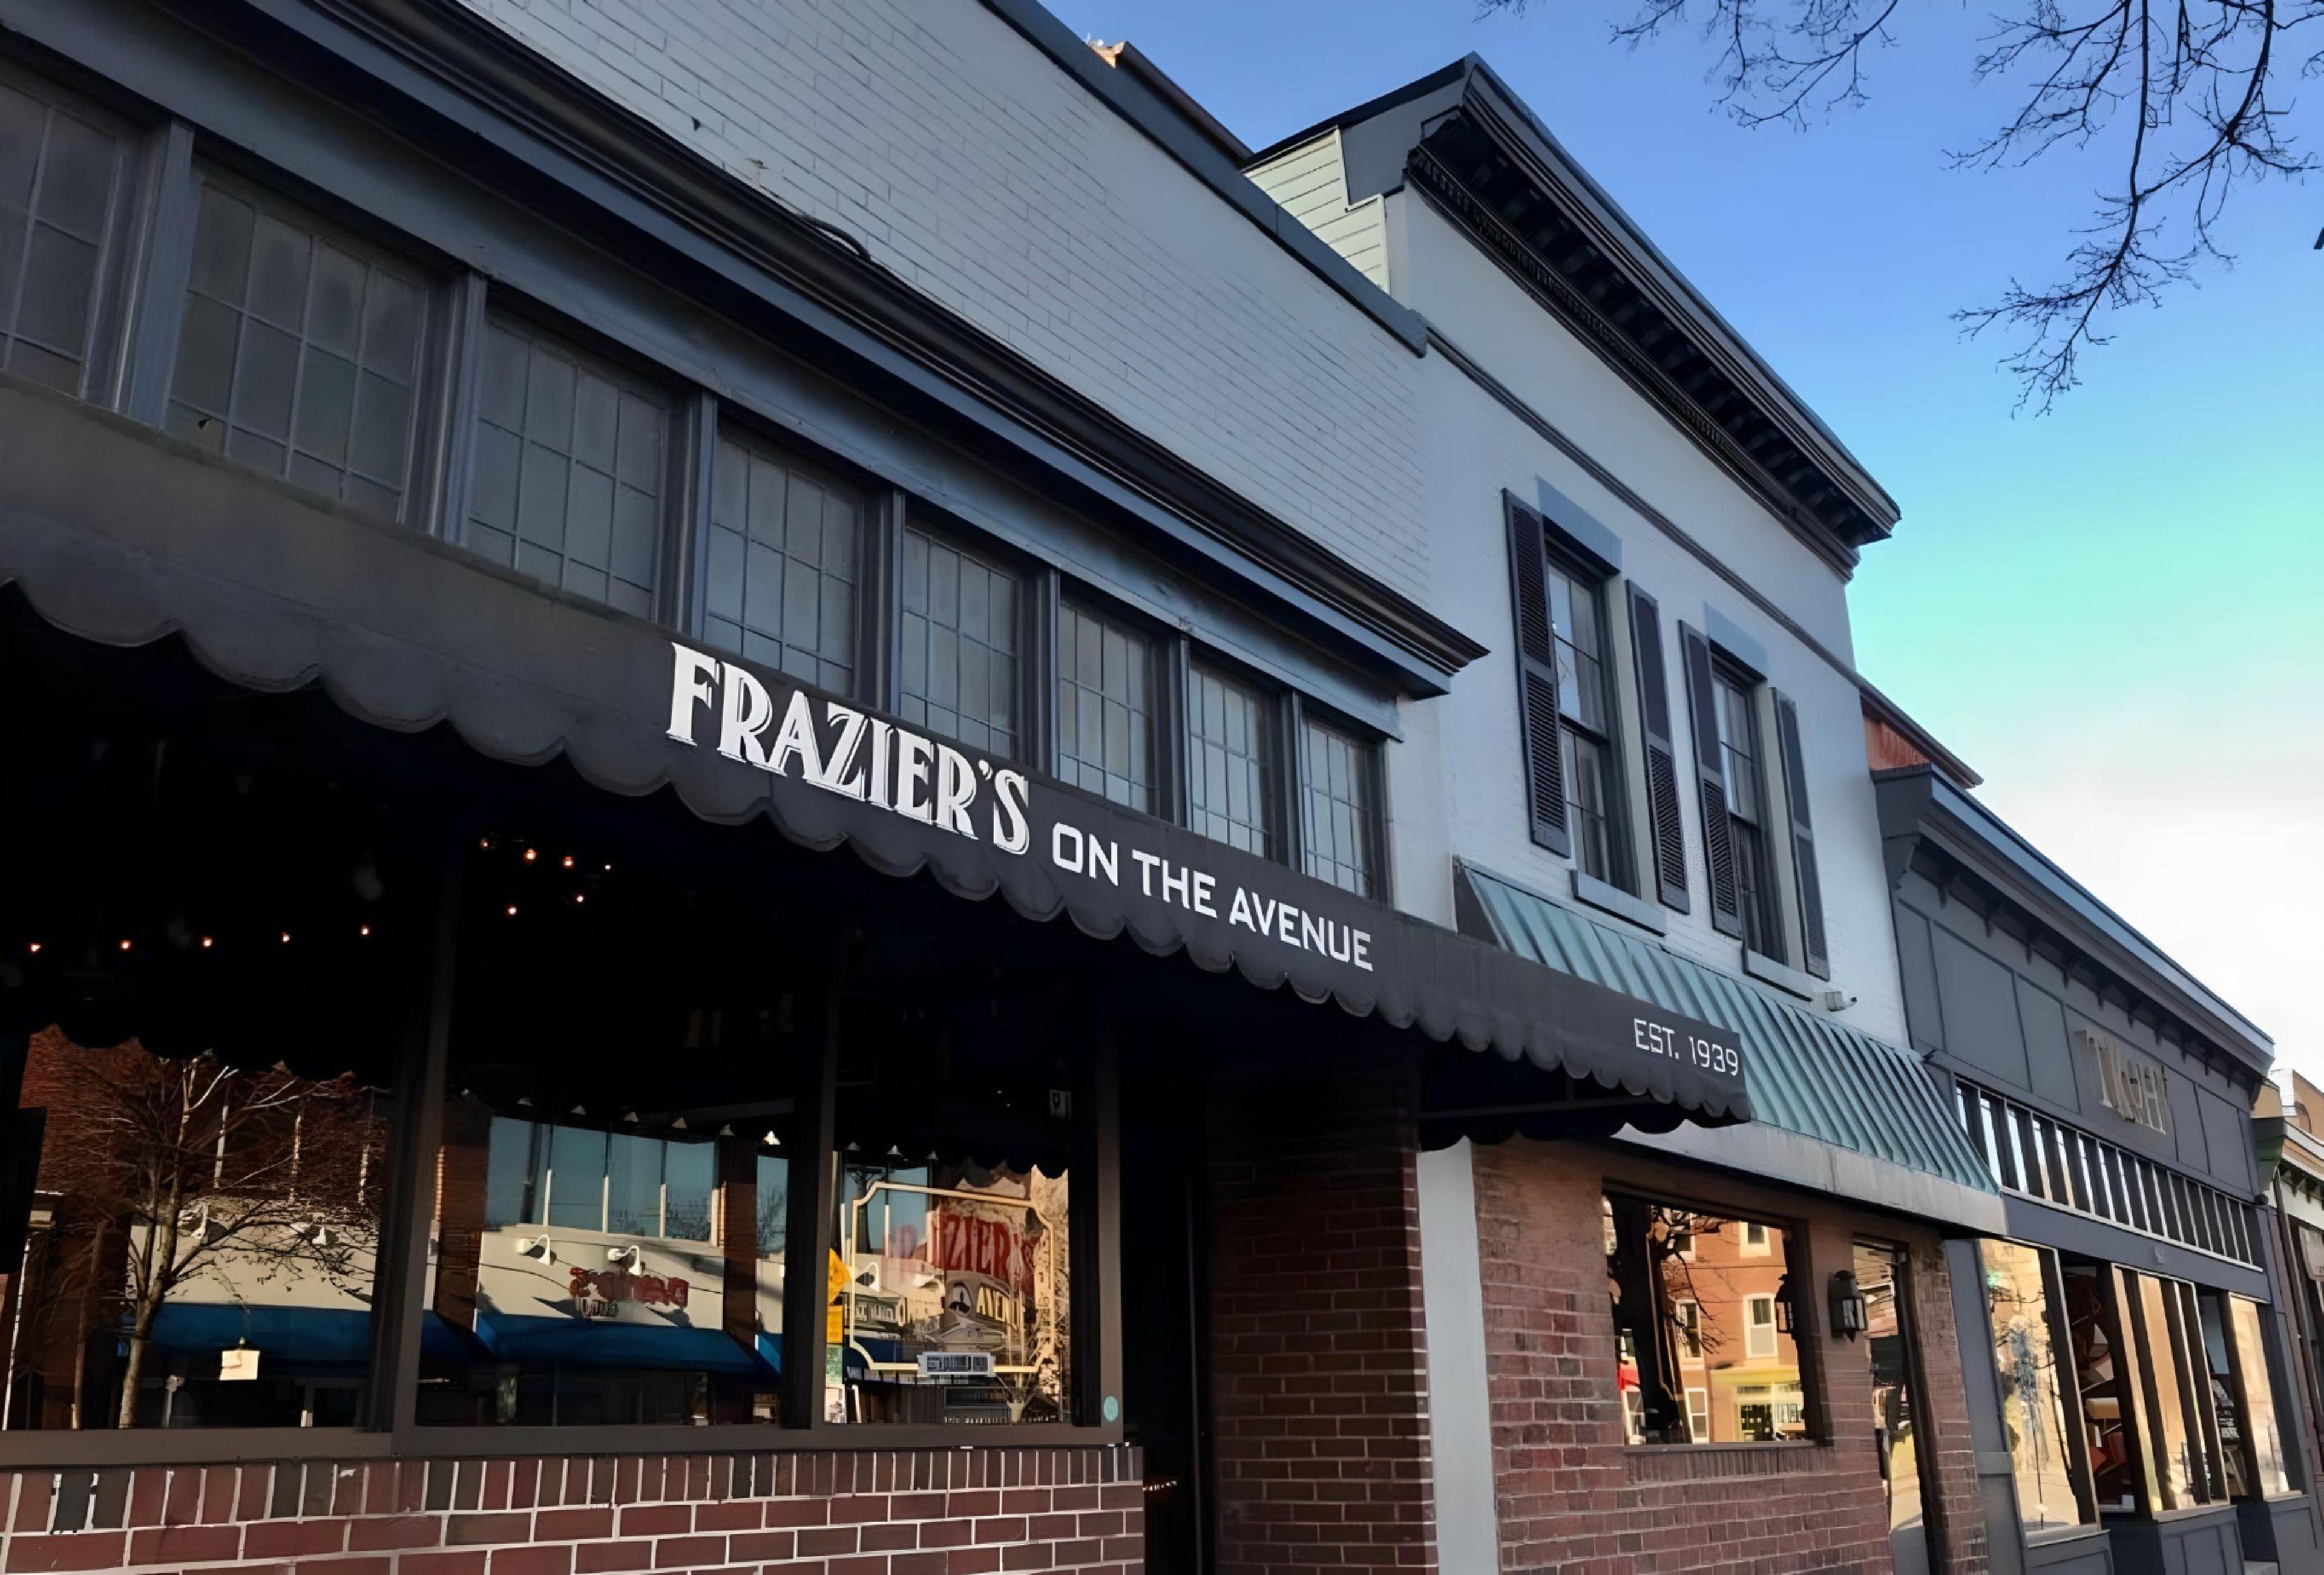 Frazier's On the Avenue